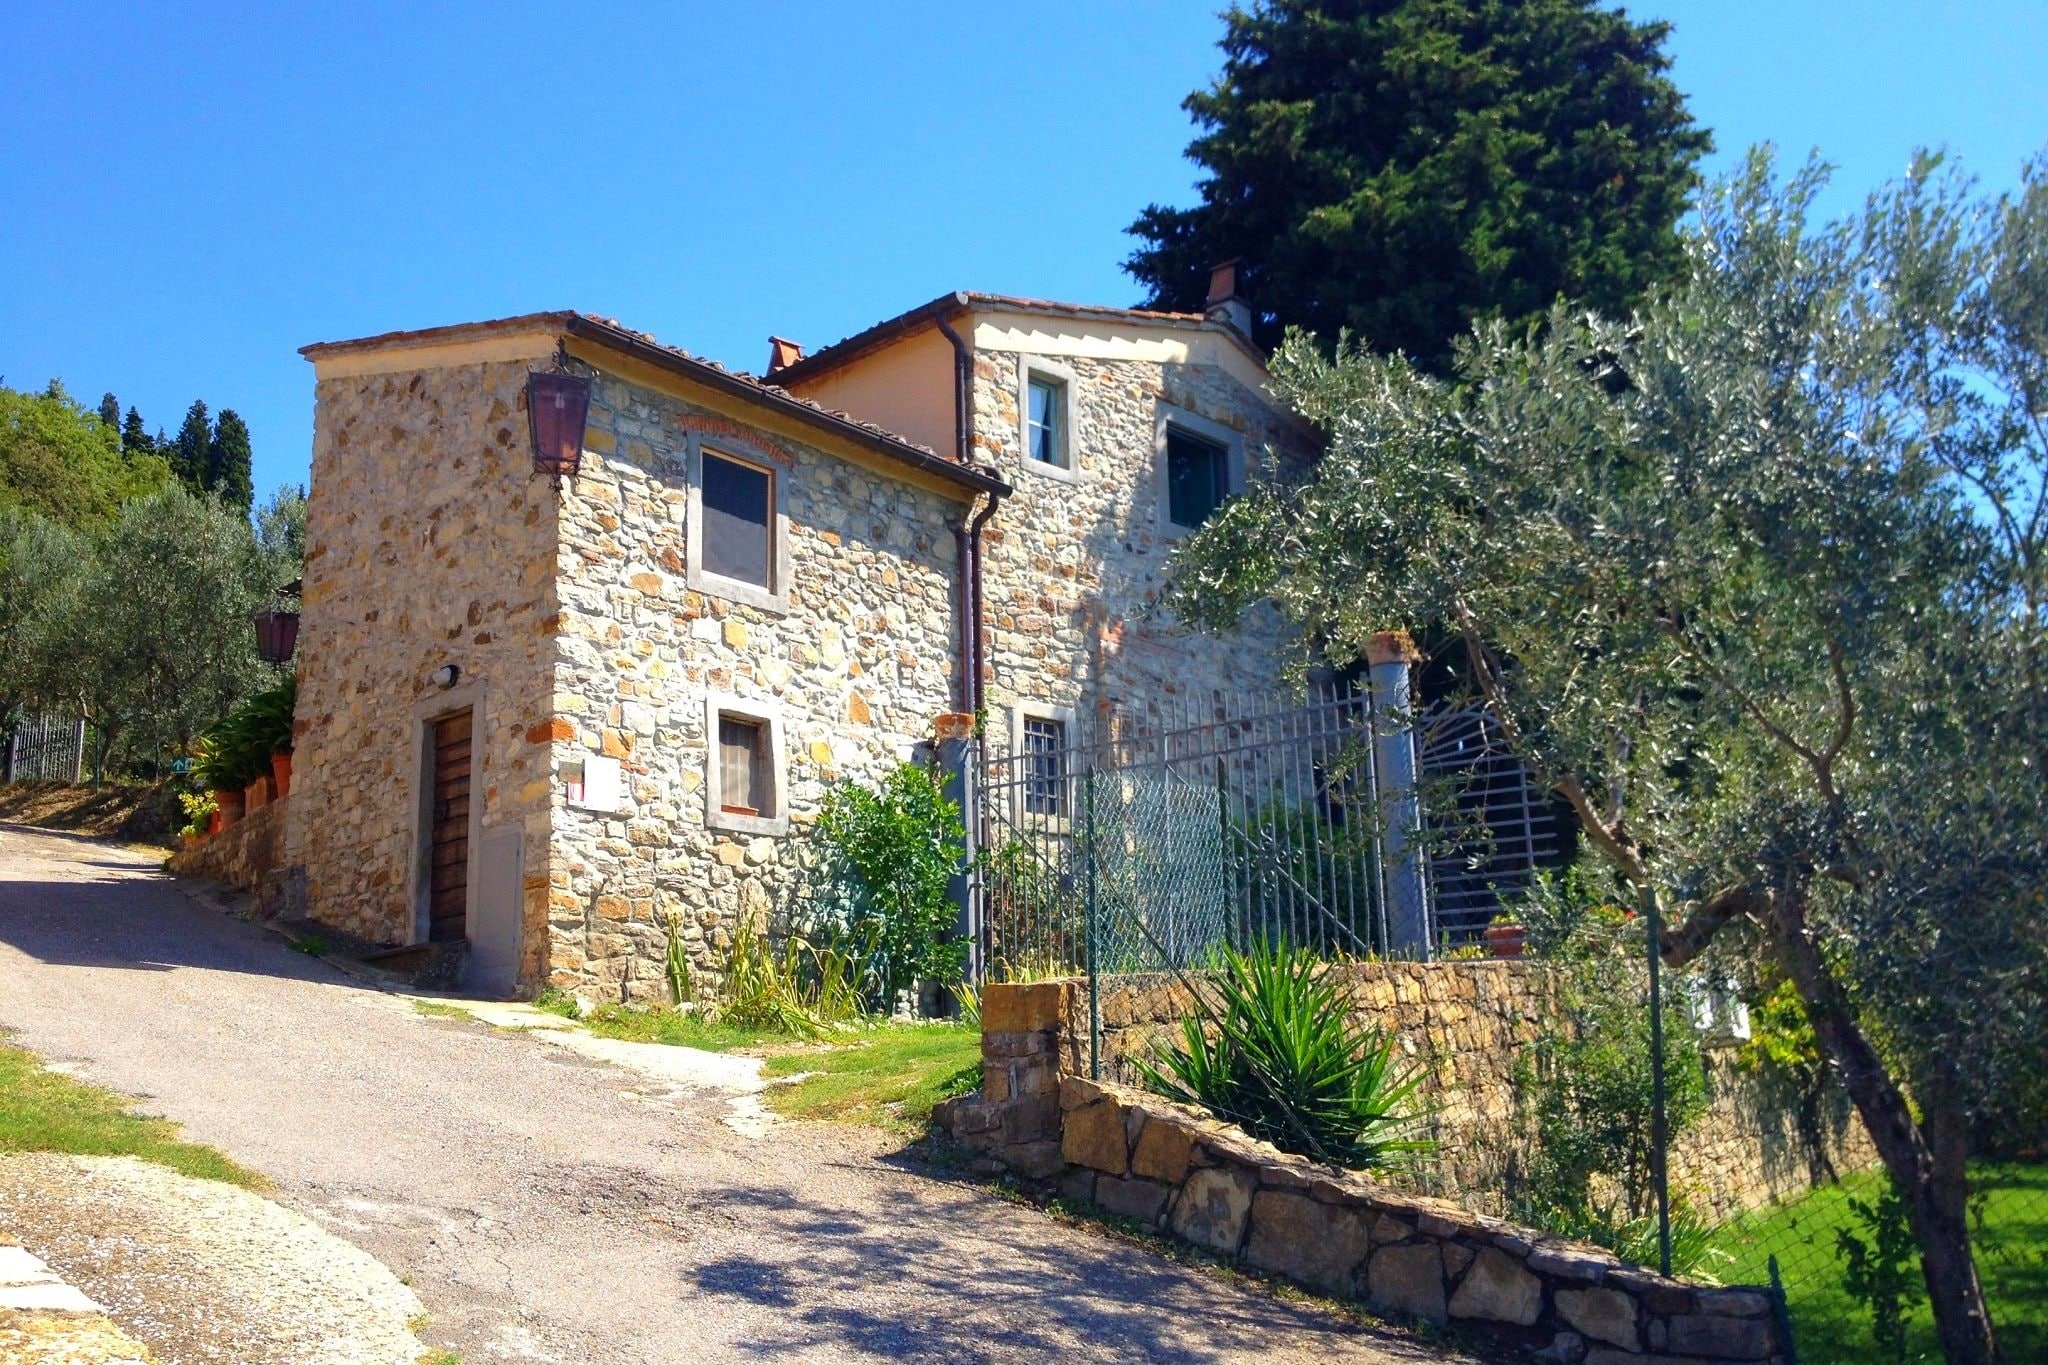 Farmhouse in a lovely park near Florence with beautiful pool among olive trees